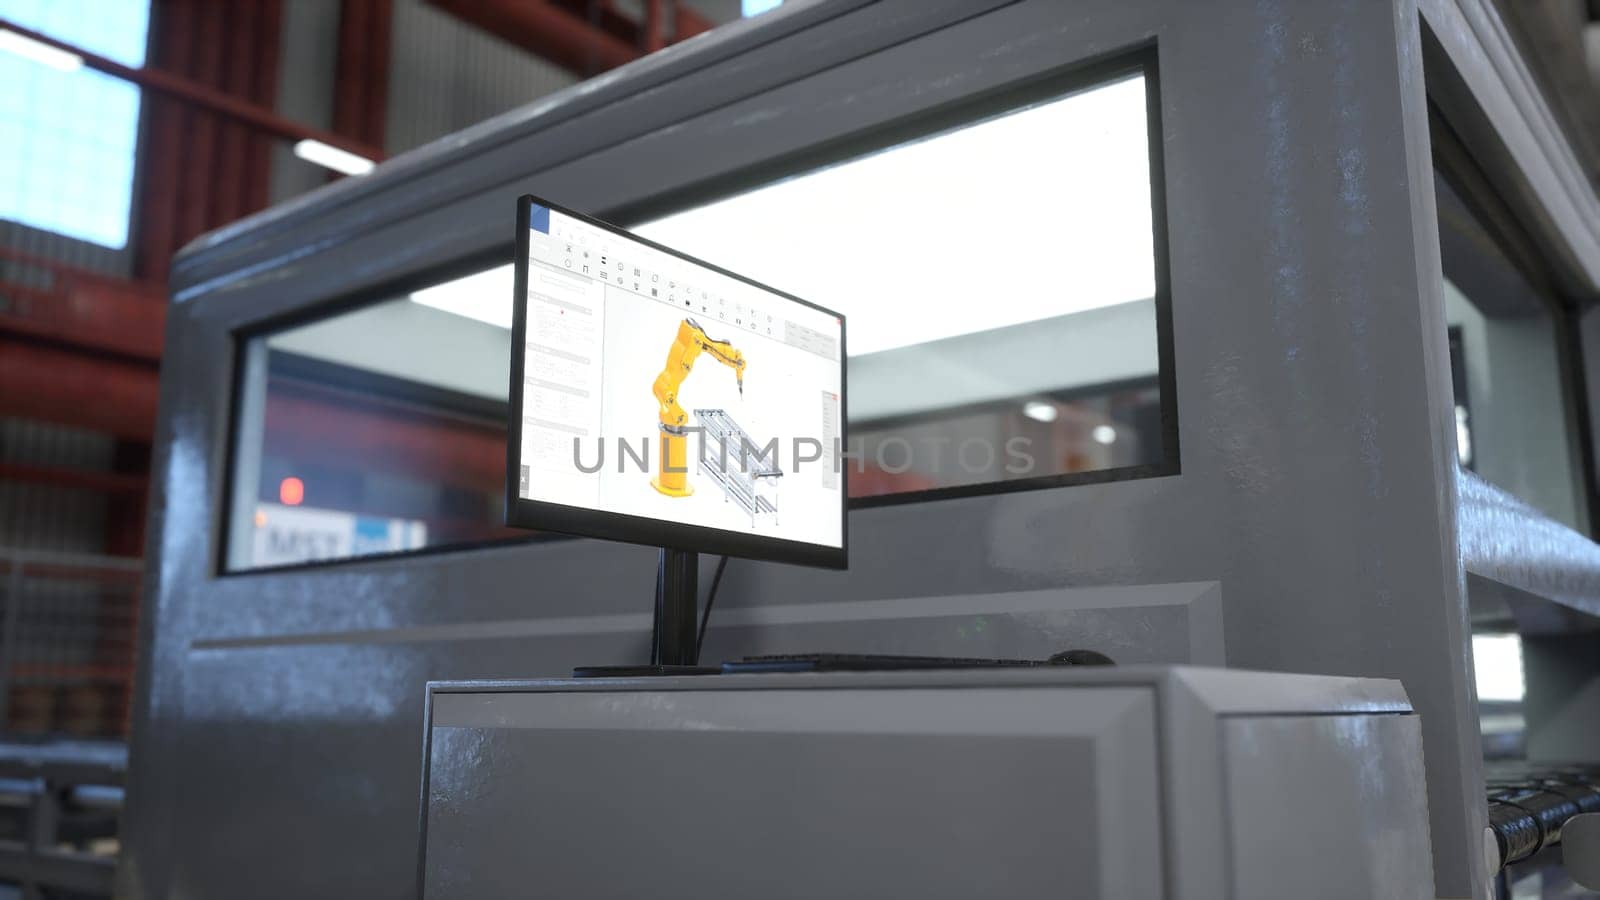 Focus on PC monitor showing controls for large machine in blurry background in warehouse. Close up on computer display used to perform tasks on CNC machinery in factory, 3D render